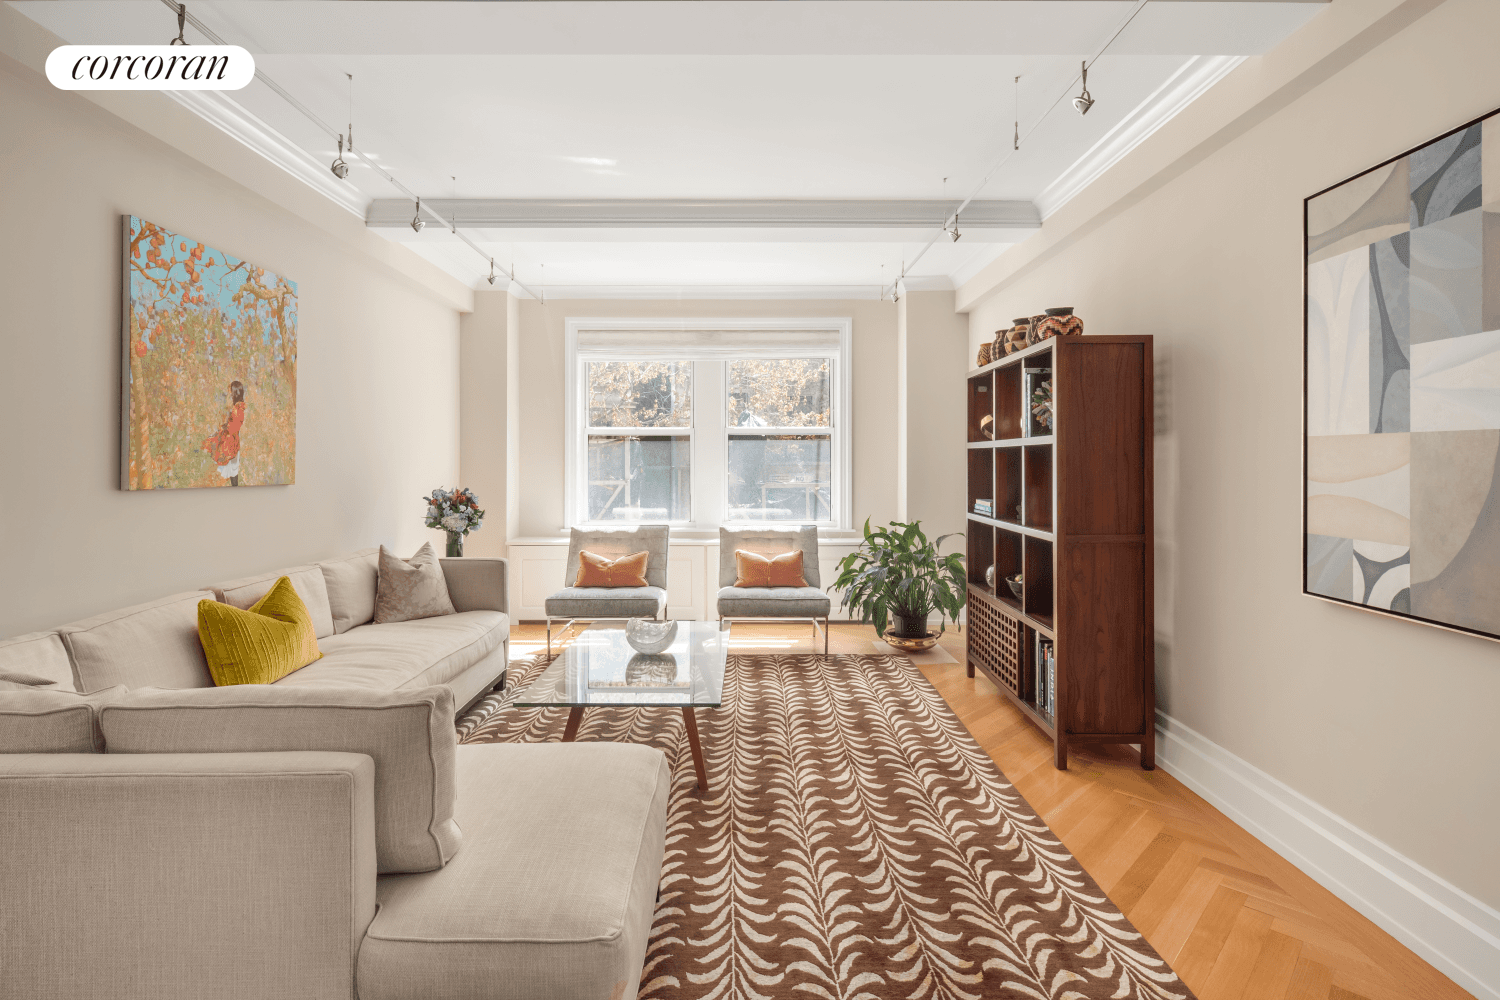 Nestled on a peaceful Upper West Side block, Residence 2E is a gracious 4 bedroom, 3 bathroom home, seamlessly blending prewar elegance with contemporary comforts.